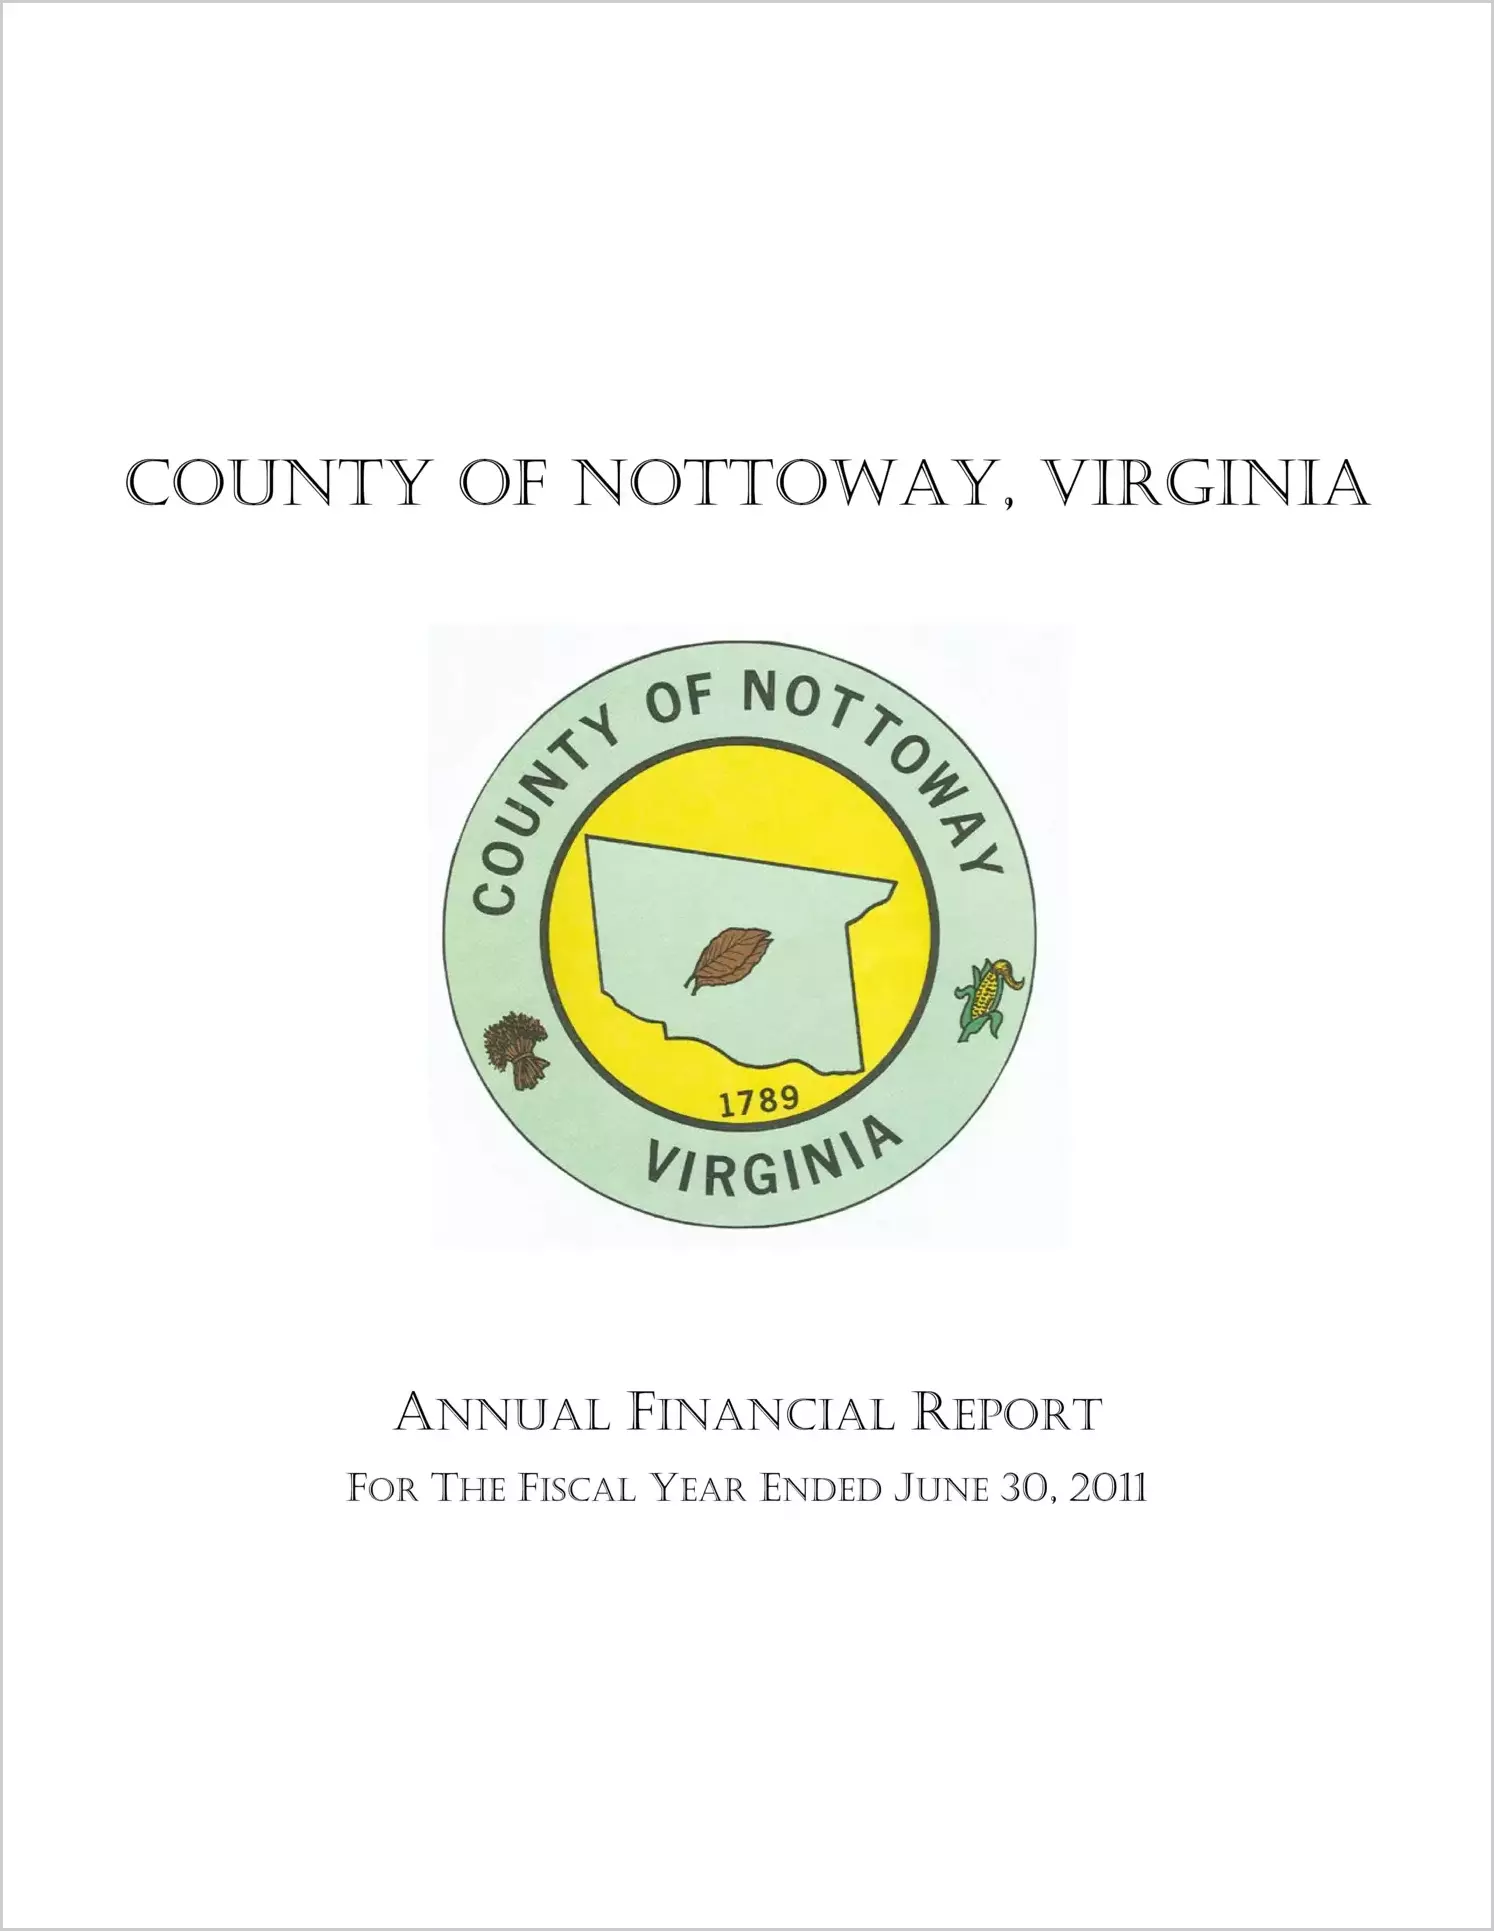 2010 Annual Financial Report for County of Nottoway